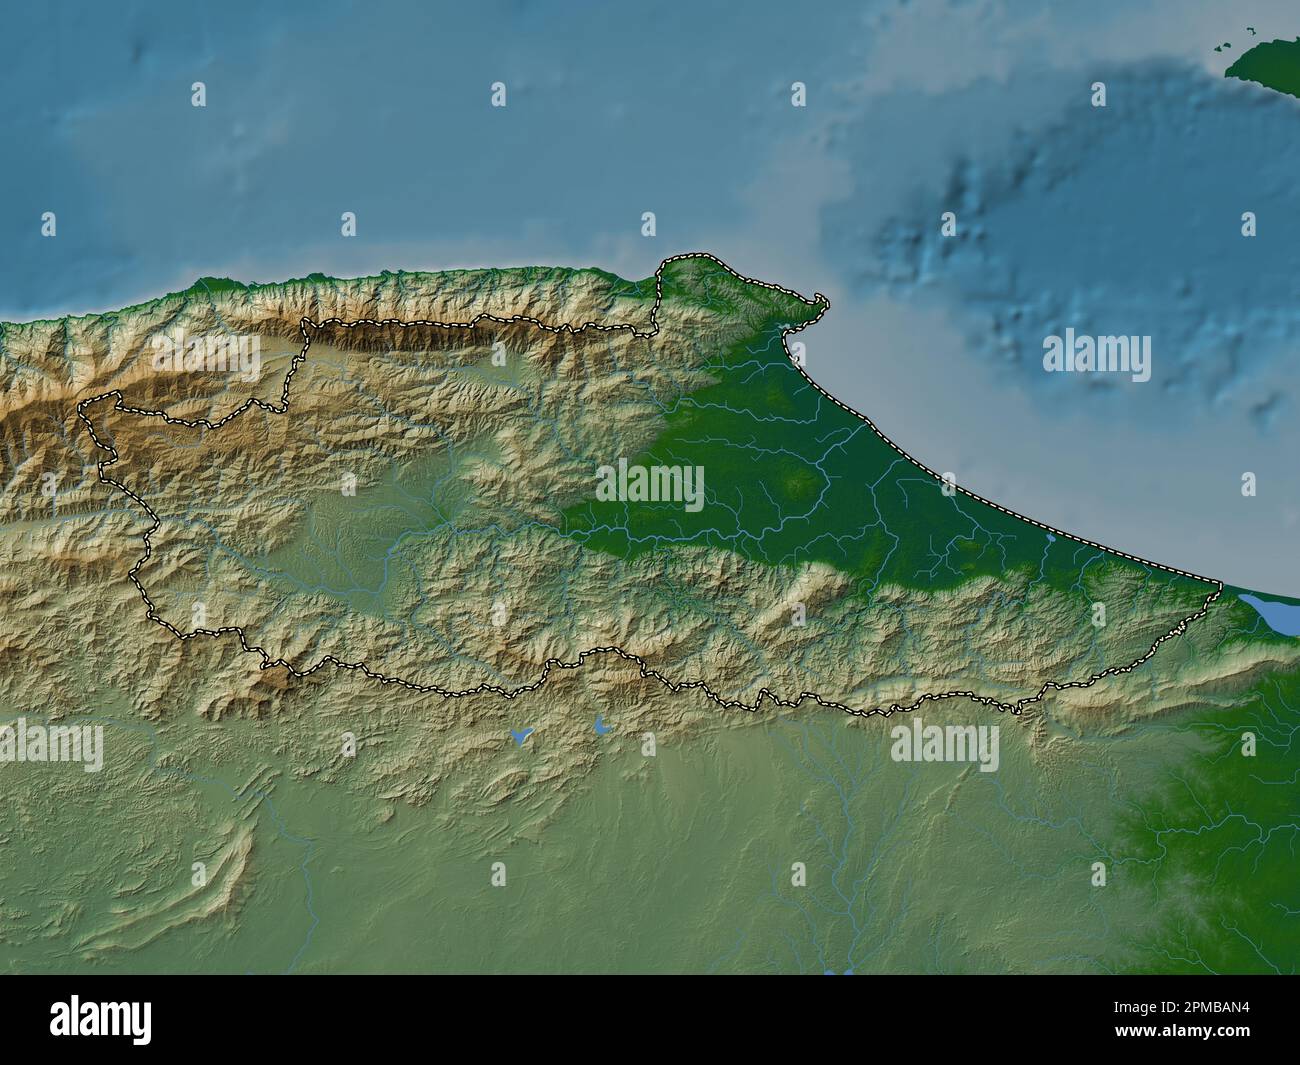 Miranda, state of Venezuela. Colored elevation map with lakes and rivers Stock Photo